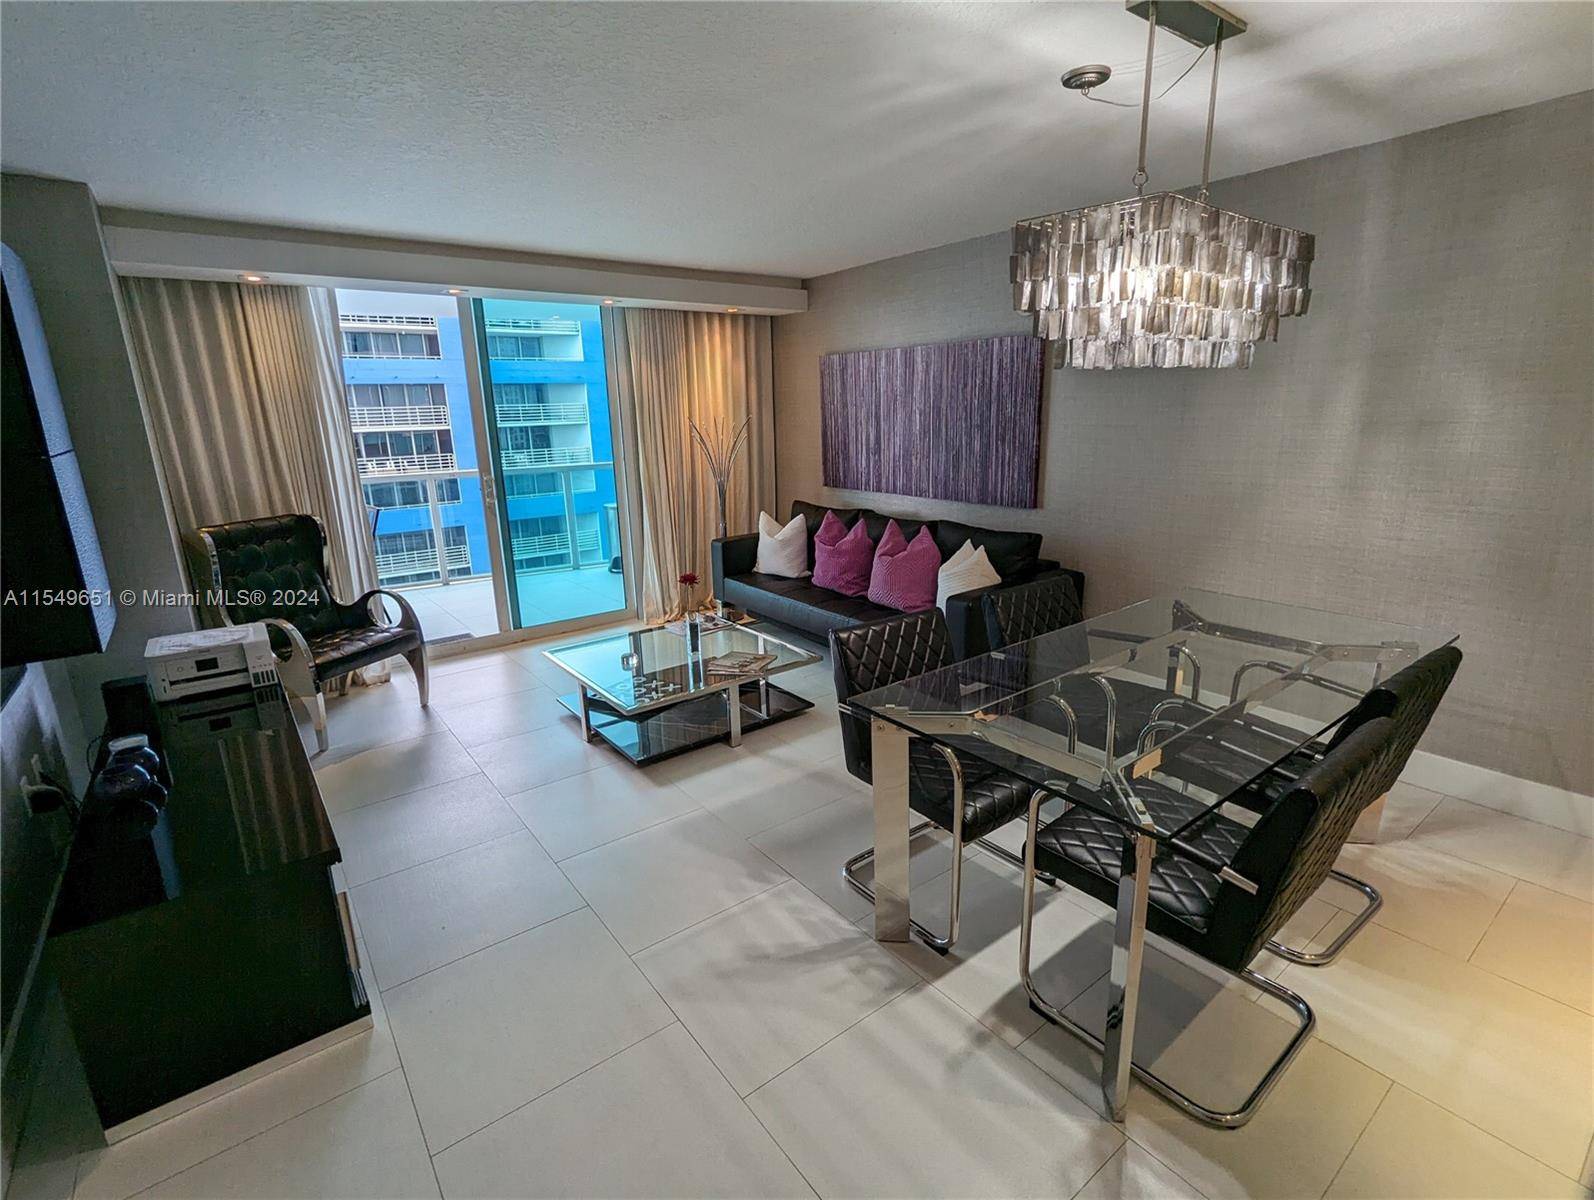 EXQUISITELY FURNISHED 1B 1B AT SKYLINE ON BRICKELL WITH BREATHTAKING VIEWS OF THE BAY AND DOWNTOWN BRICKELL.